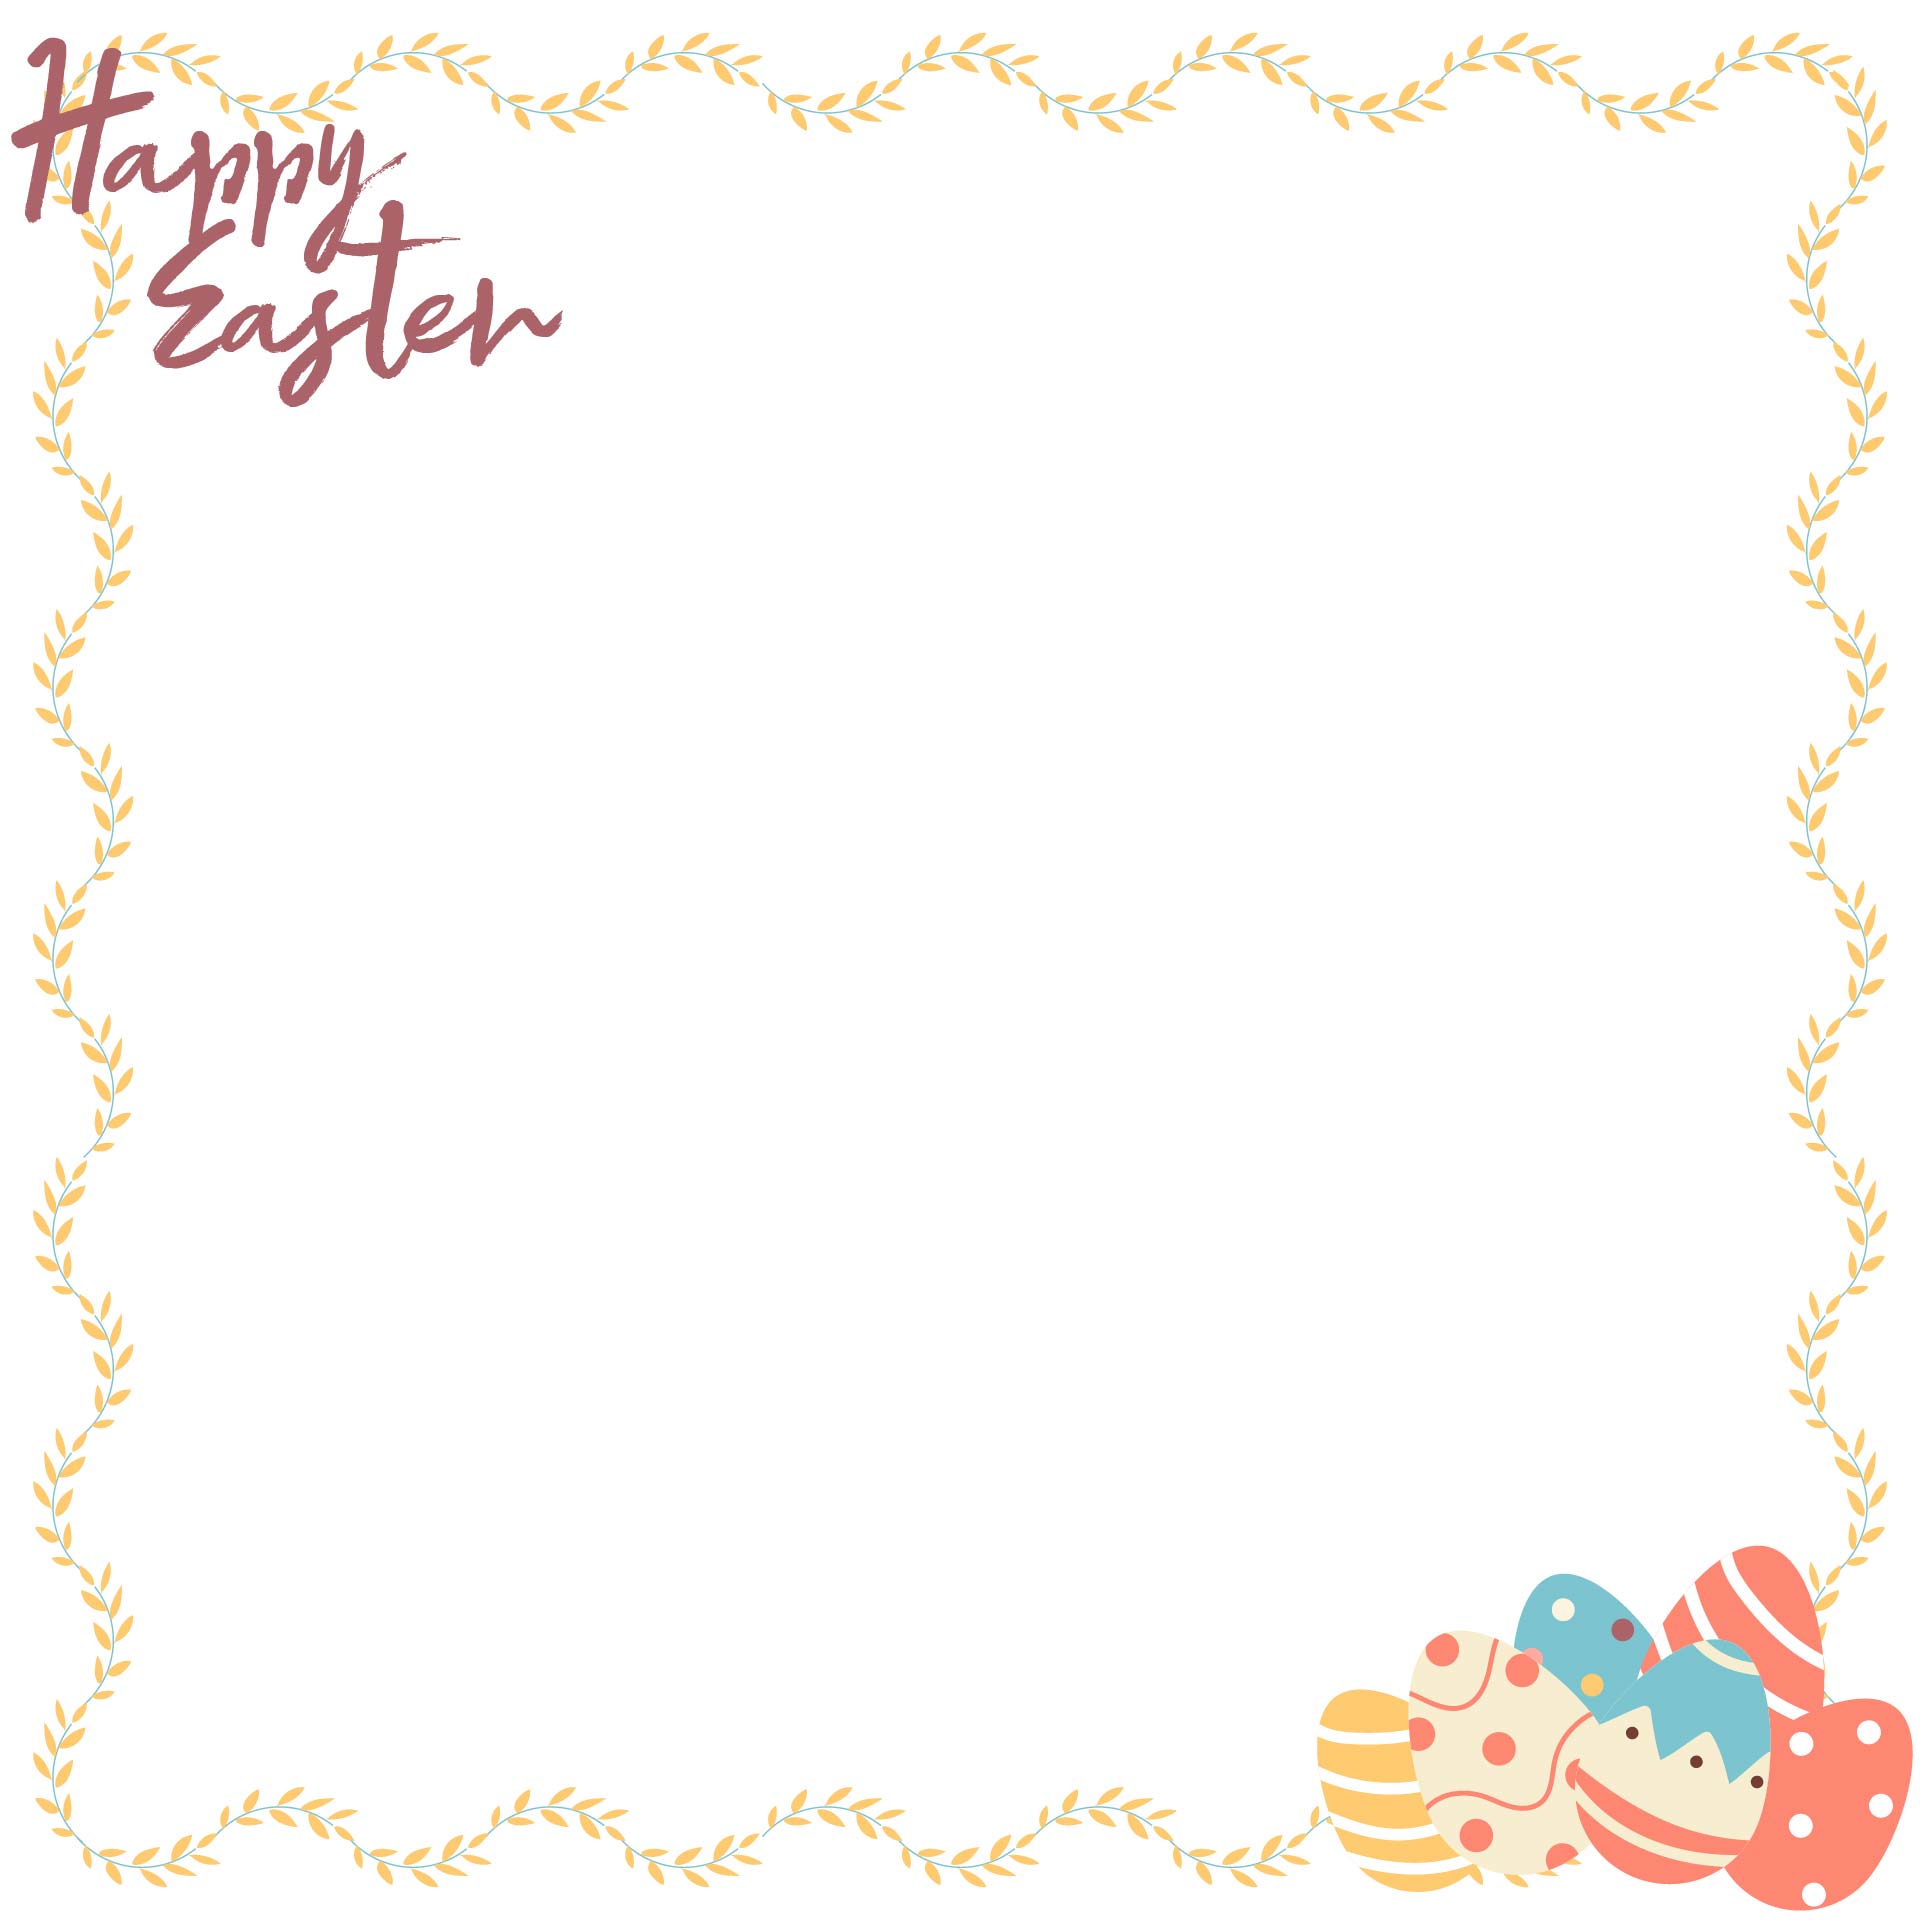 7 Best Images of Easter Border Template Free Printable Free Easter